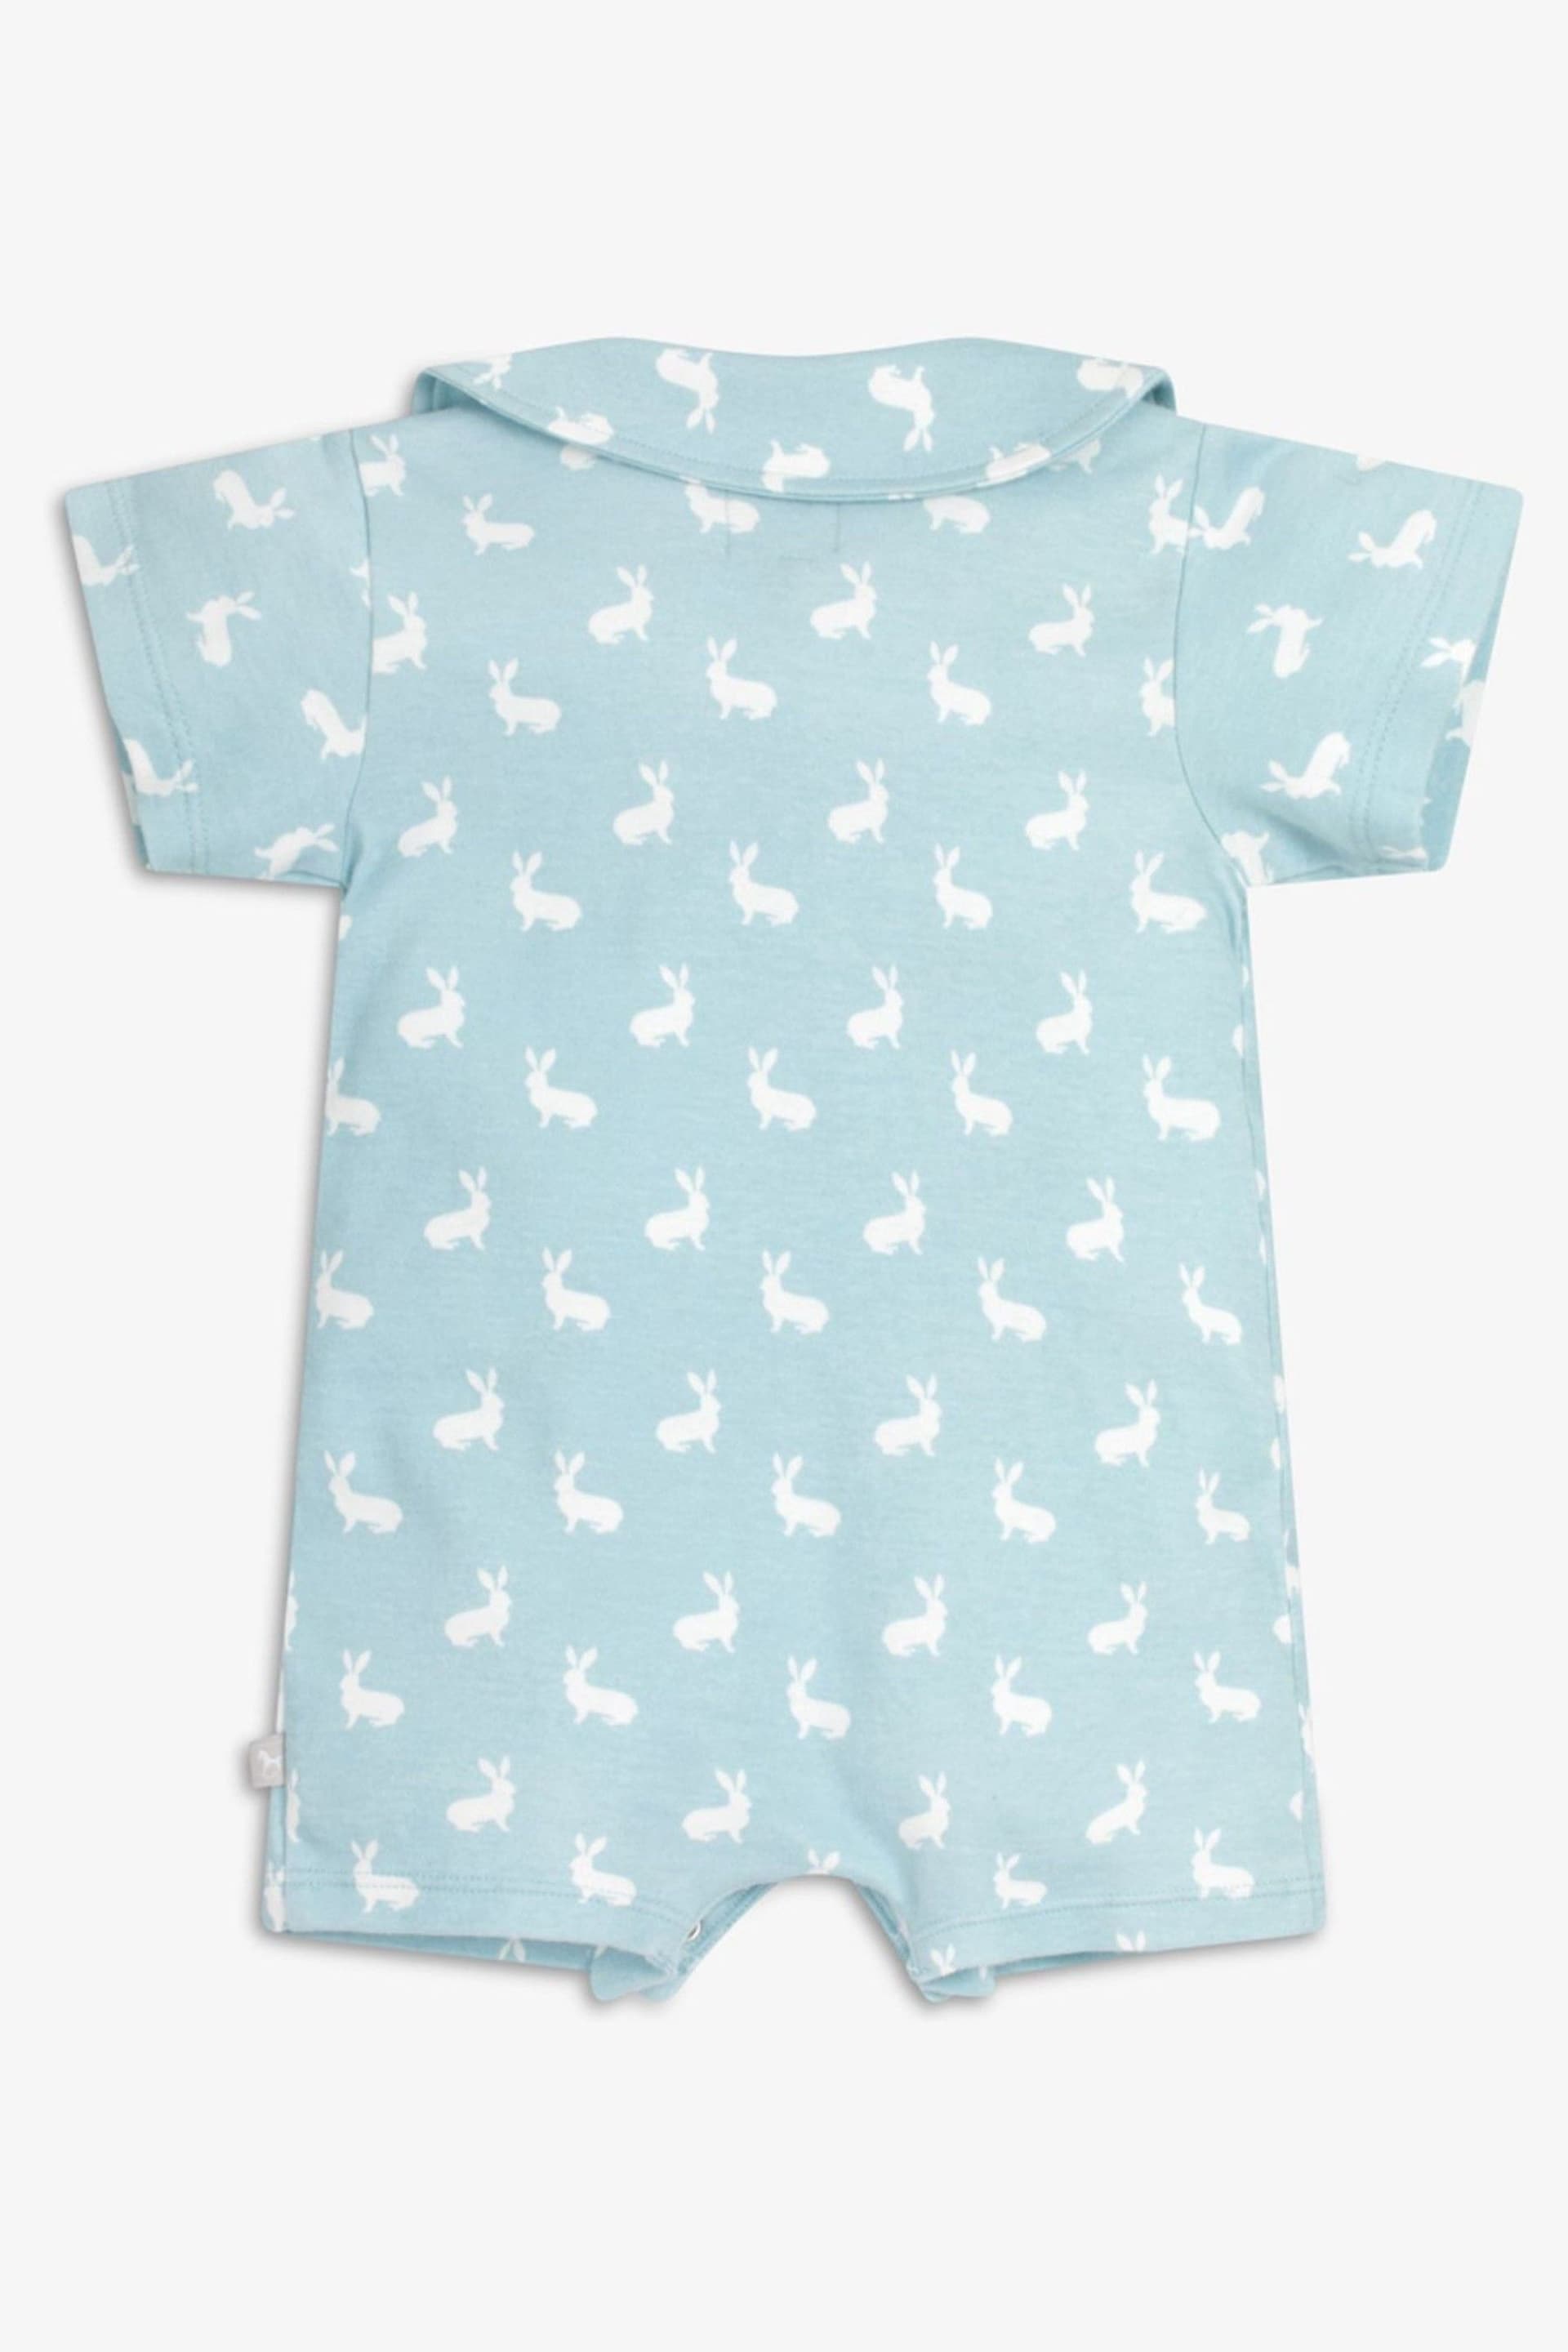 The Little Tailor Baby Jersey Bunny Print Romper - Image 3 of 4